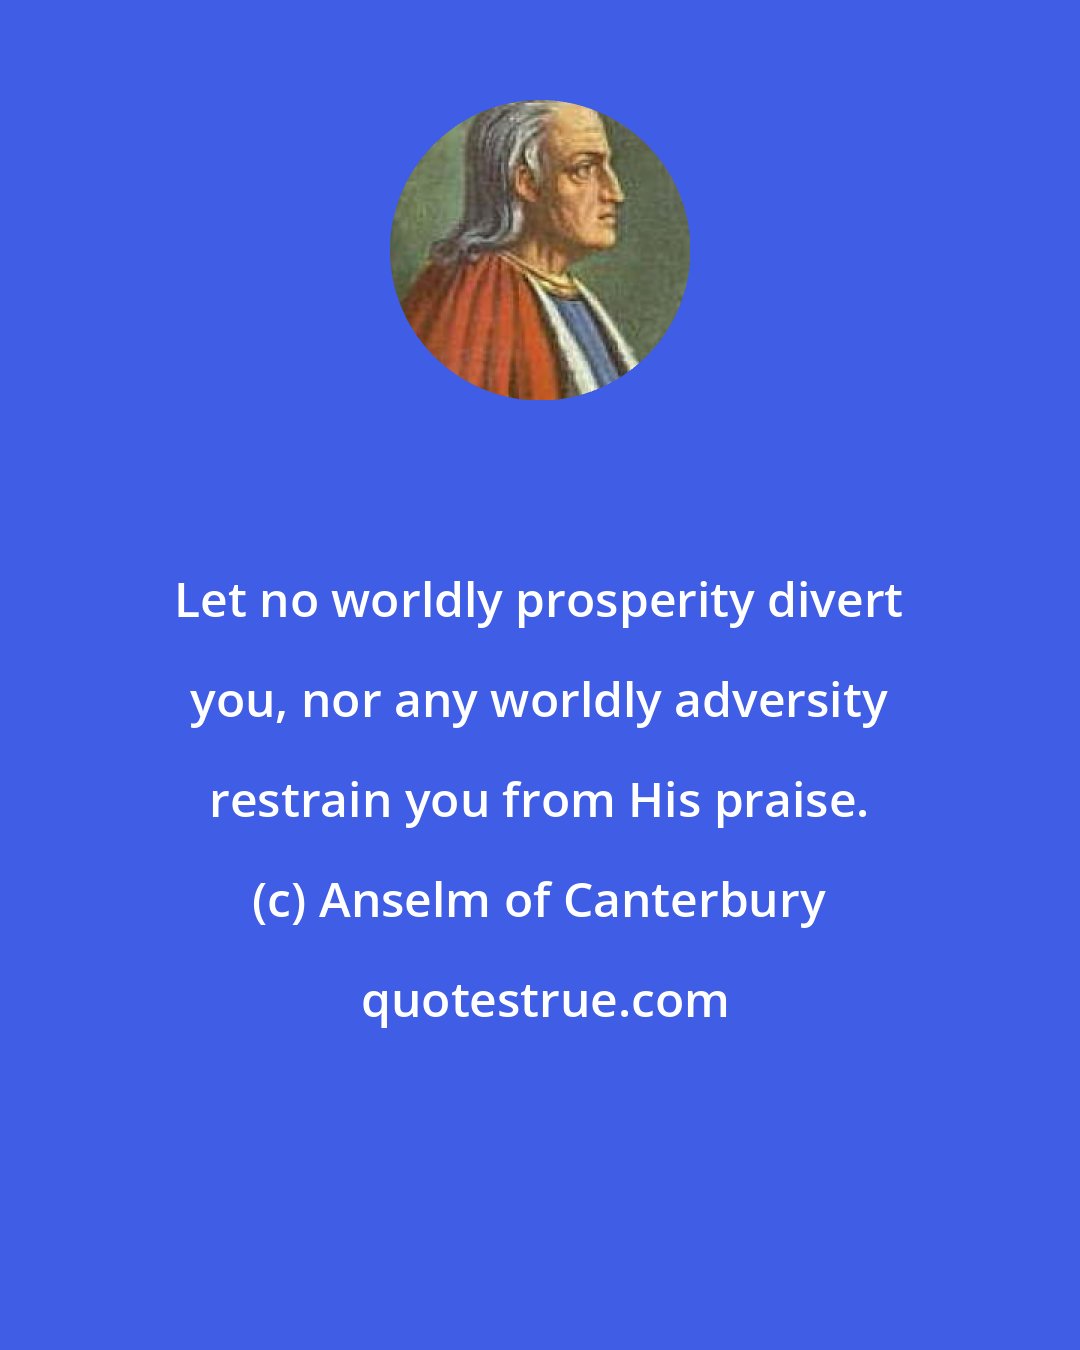 Anselm of Canterbury: Let no worldly prosperity divert you, nor any worldly adversity restrain you from His praise.